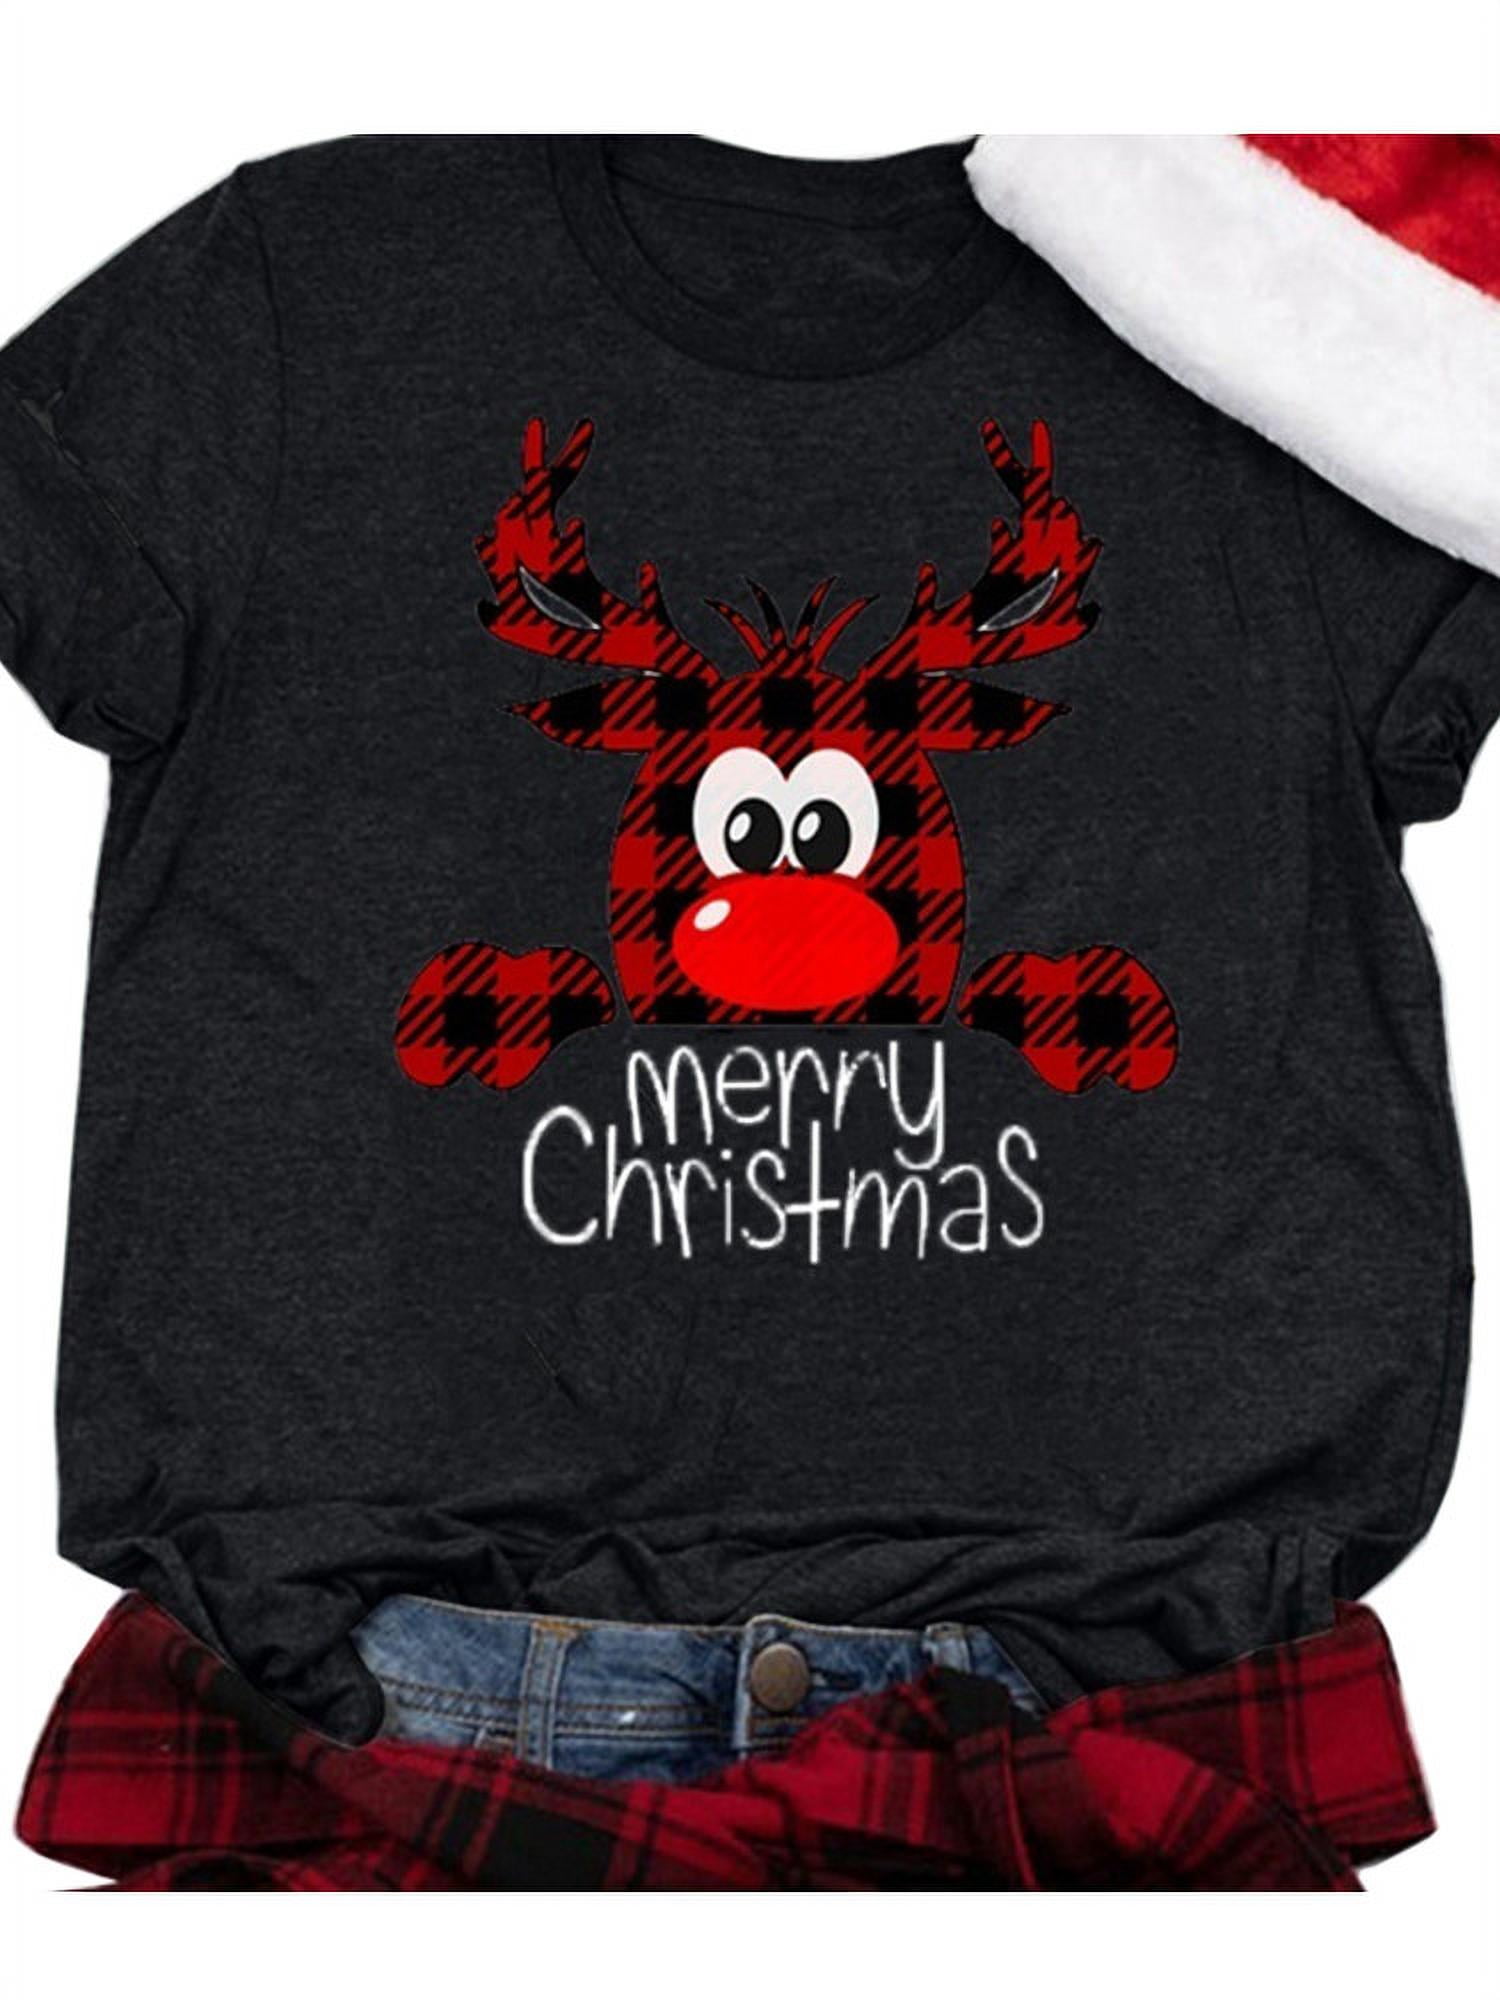 Eoeth Christmas Blouse Shirt for Women,Fashion O-Neck Short Sleeve T-Shirt Casual Cute Holiday Xmas Letter Print Pullover